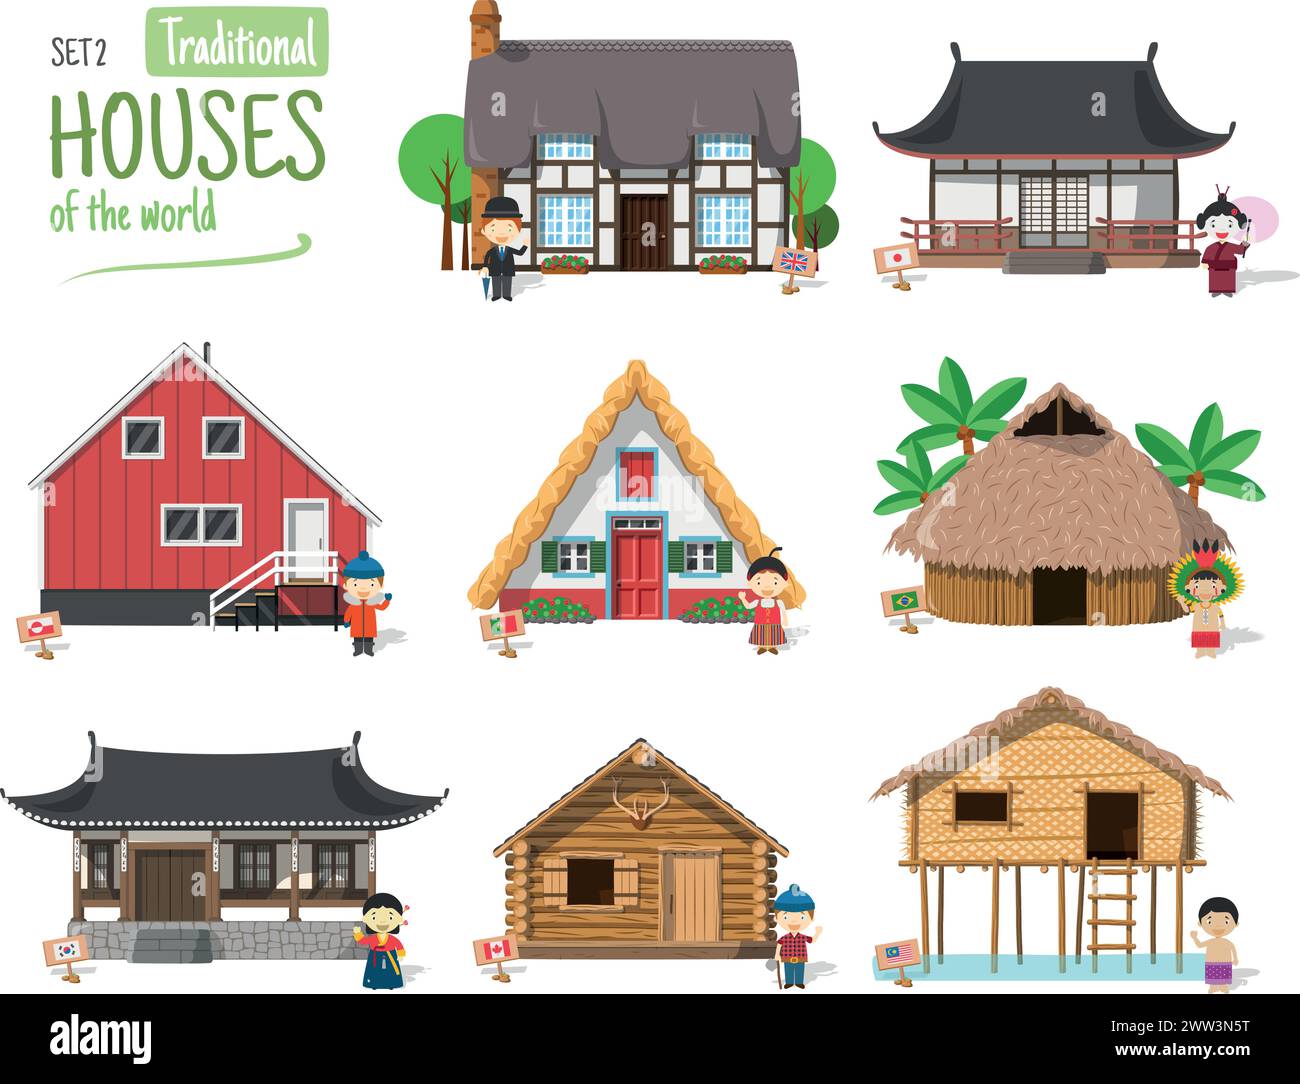 Vector illustration Set 2 of Traditional Houses of the World in cartoon style isolated on white background Stock Vector